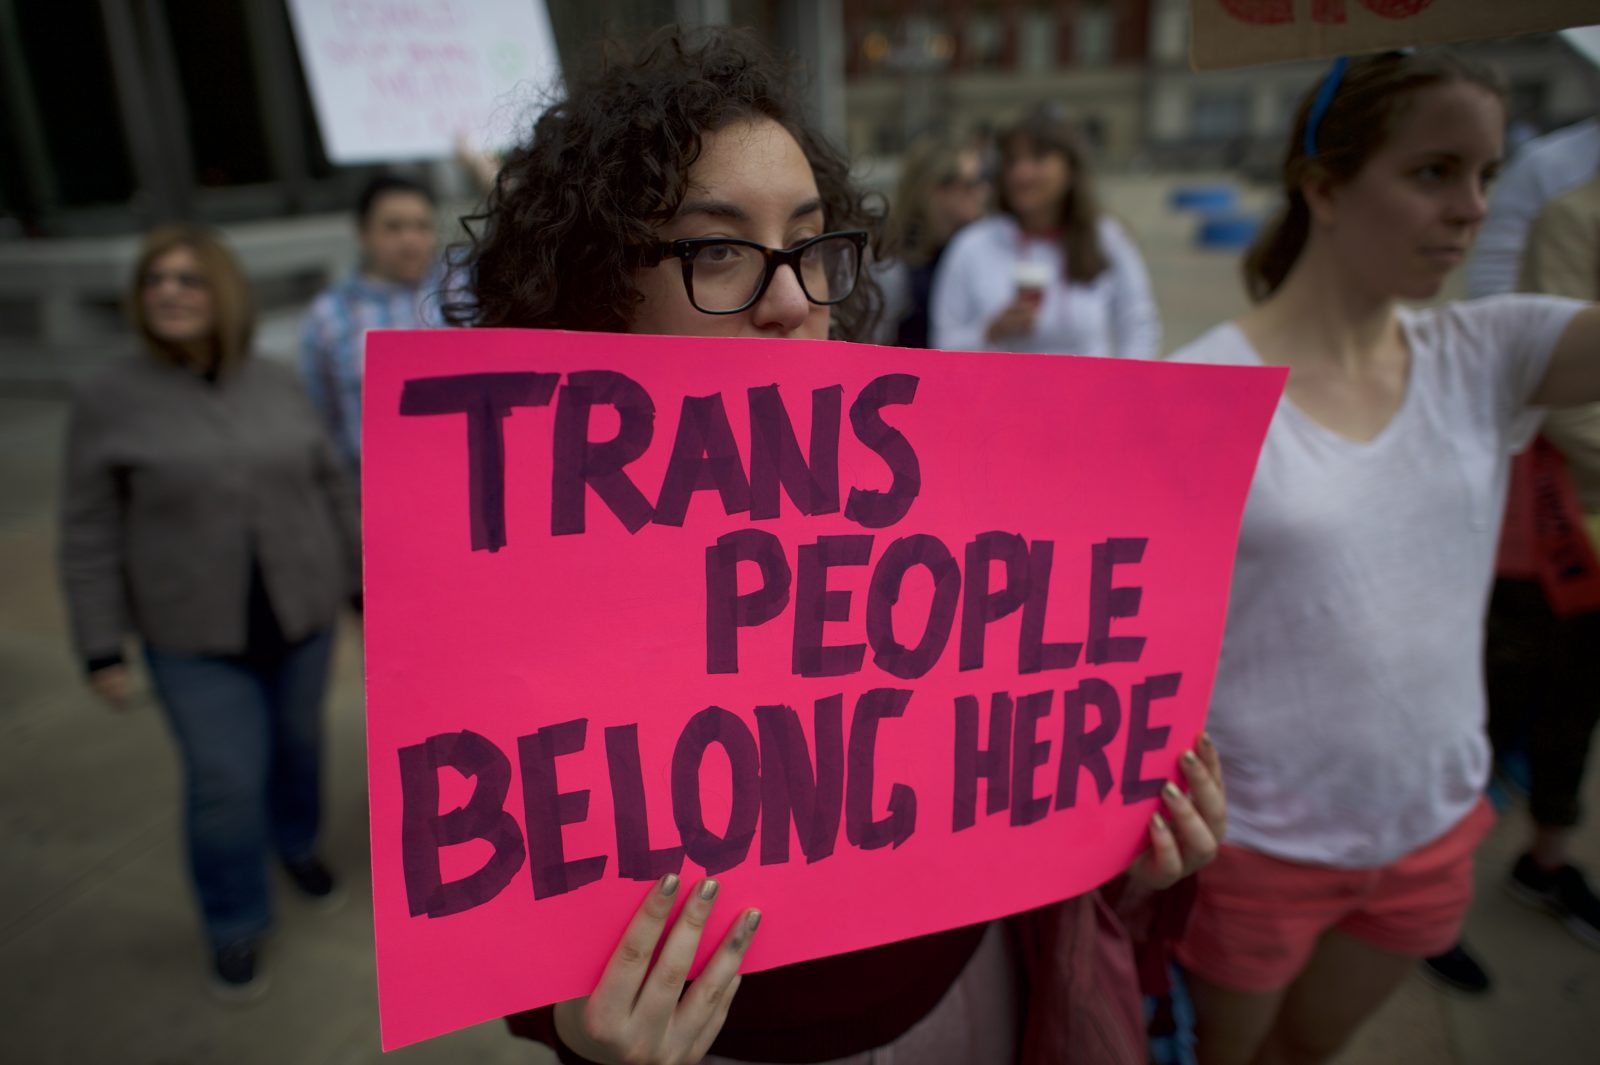 Transvestite, Transsexual, Transgender Heres what you should actually call trans people pic